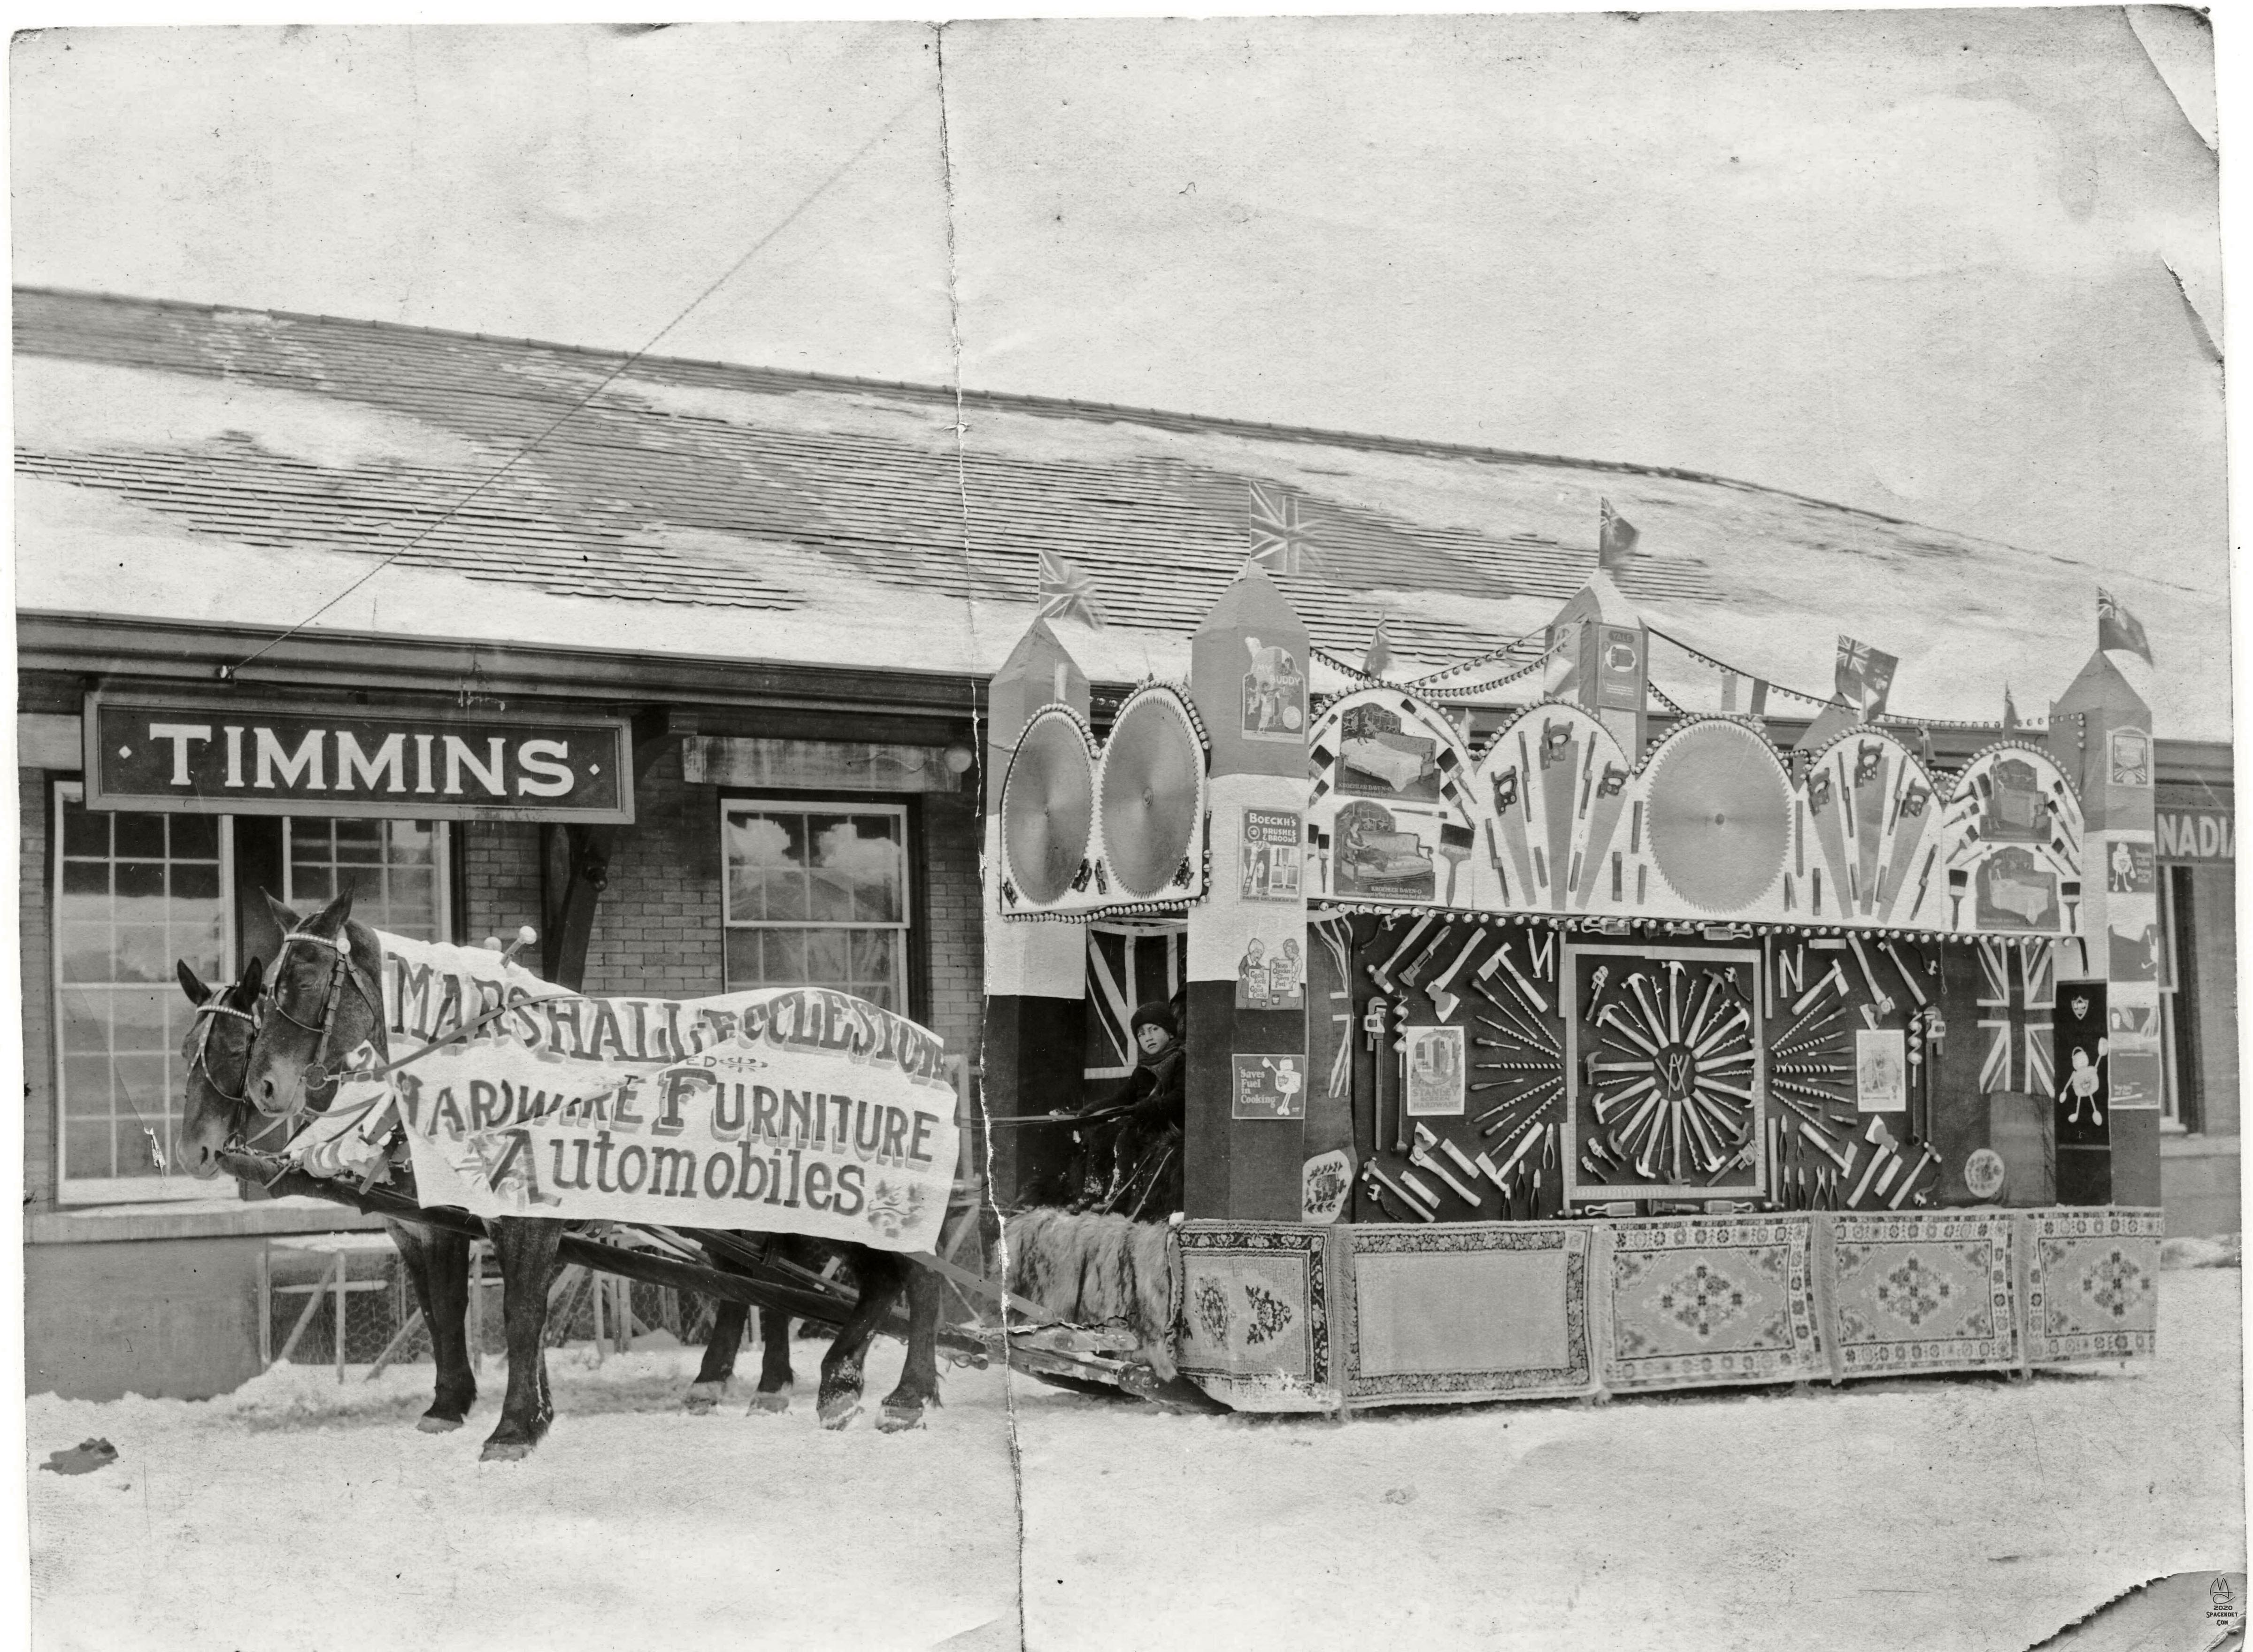 Horse-drawn Marshall-Ecclestone Furniture & Hardware store parade float in front of the Timmins, Ontario, railroad depot.

Grandfather worked at the store as a young man and likely had a hand in constructing this display of the variety of tools and supplies available there.

Similar photos in the collection are dated 1927.
